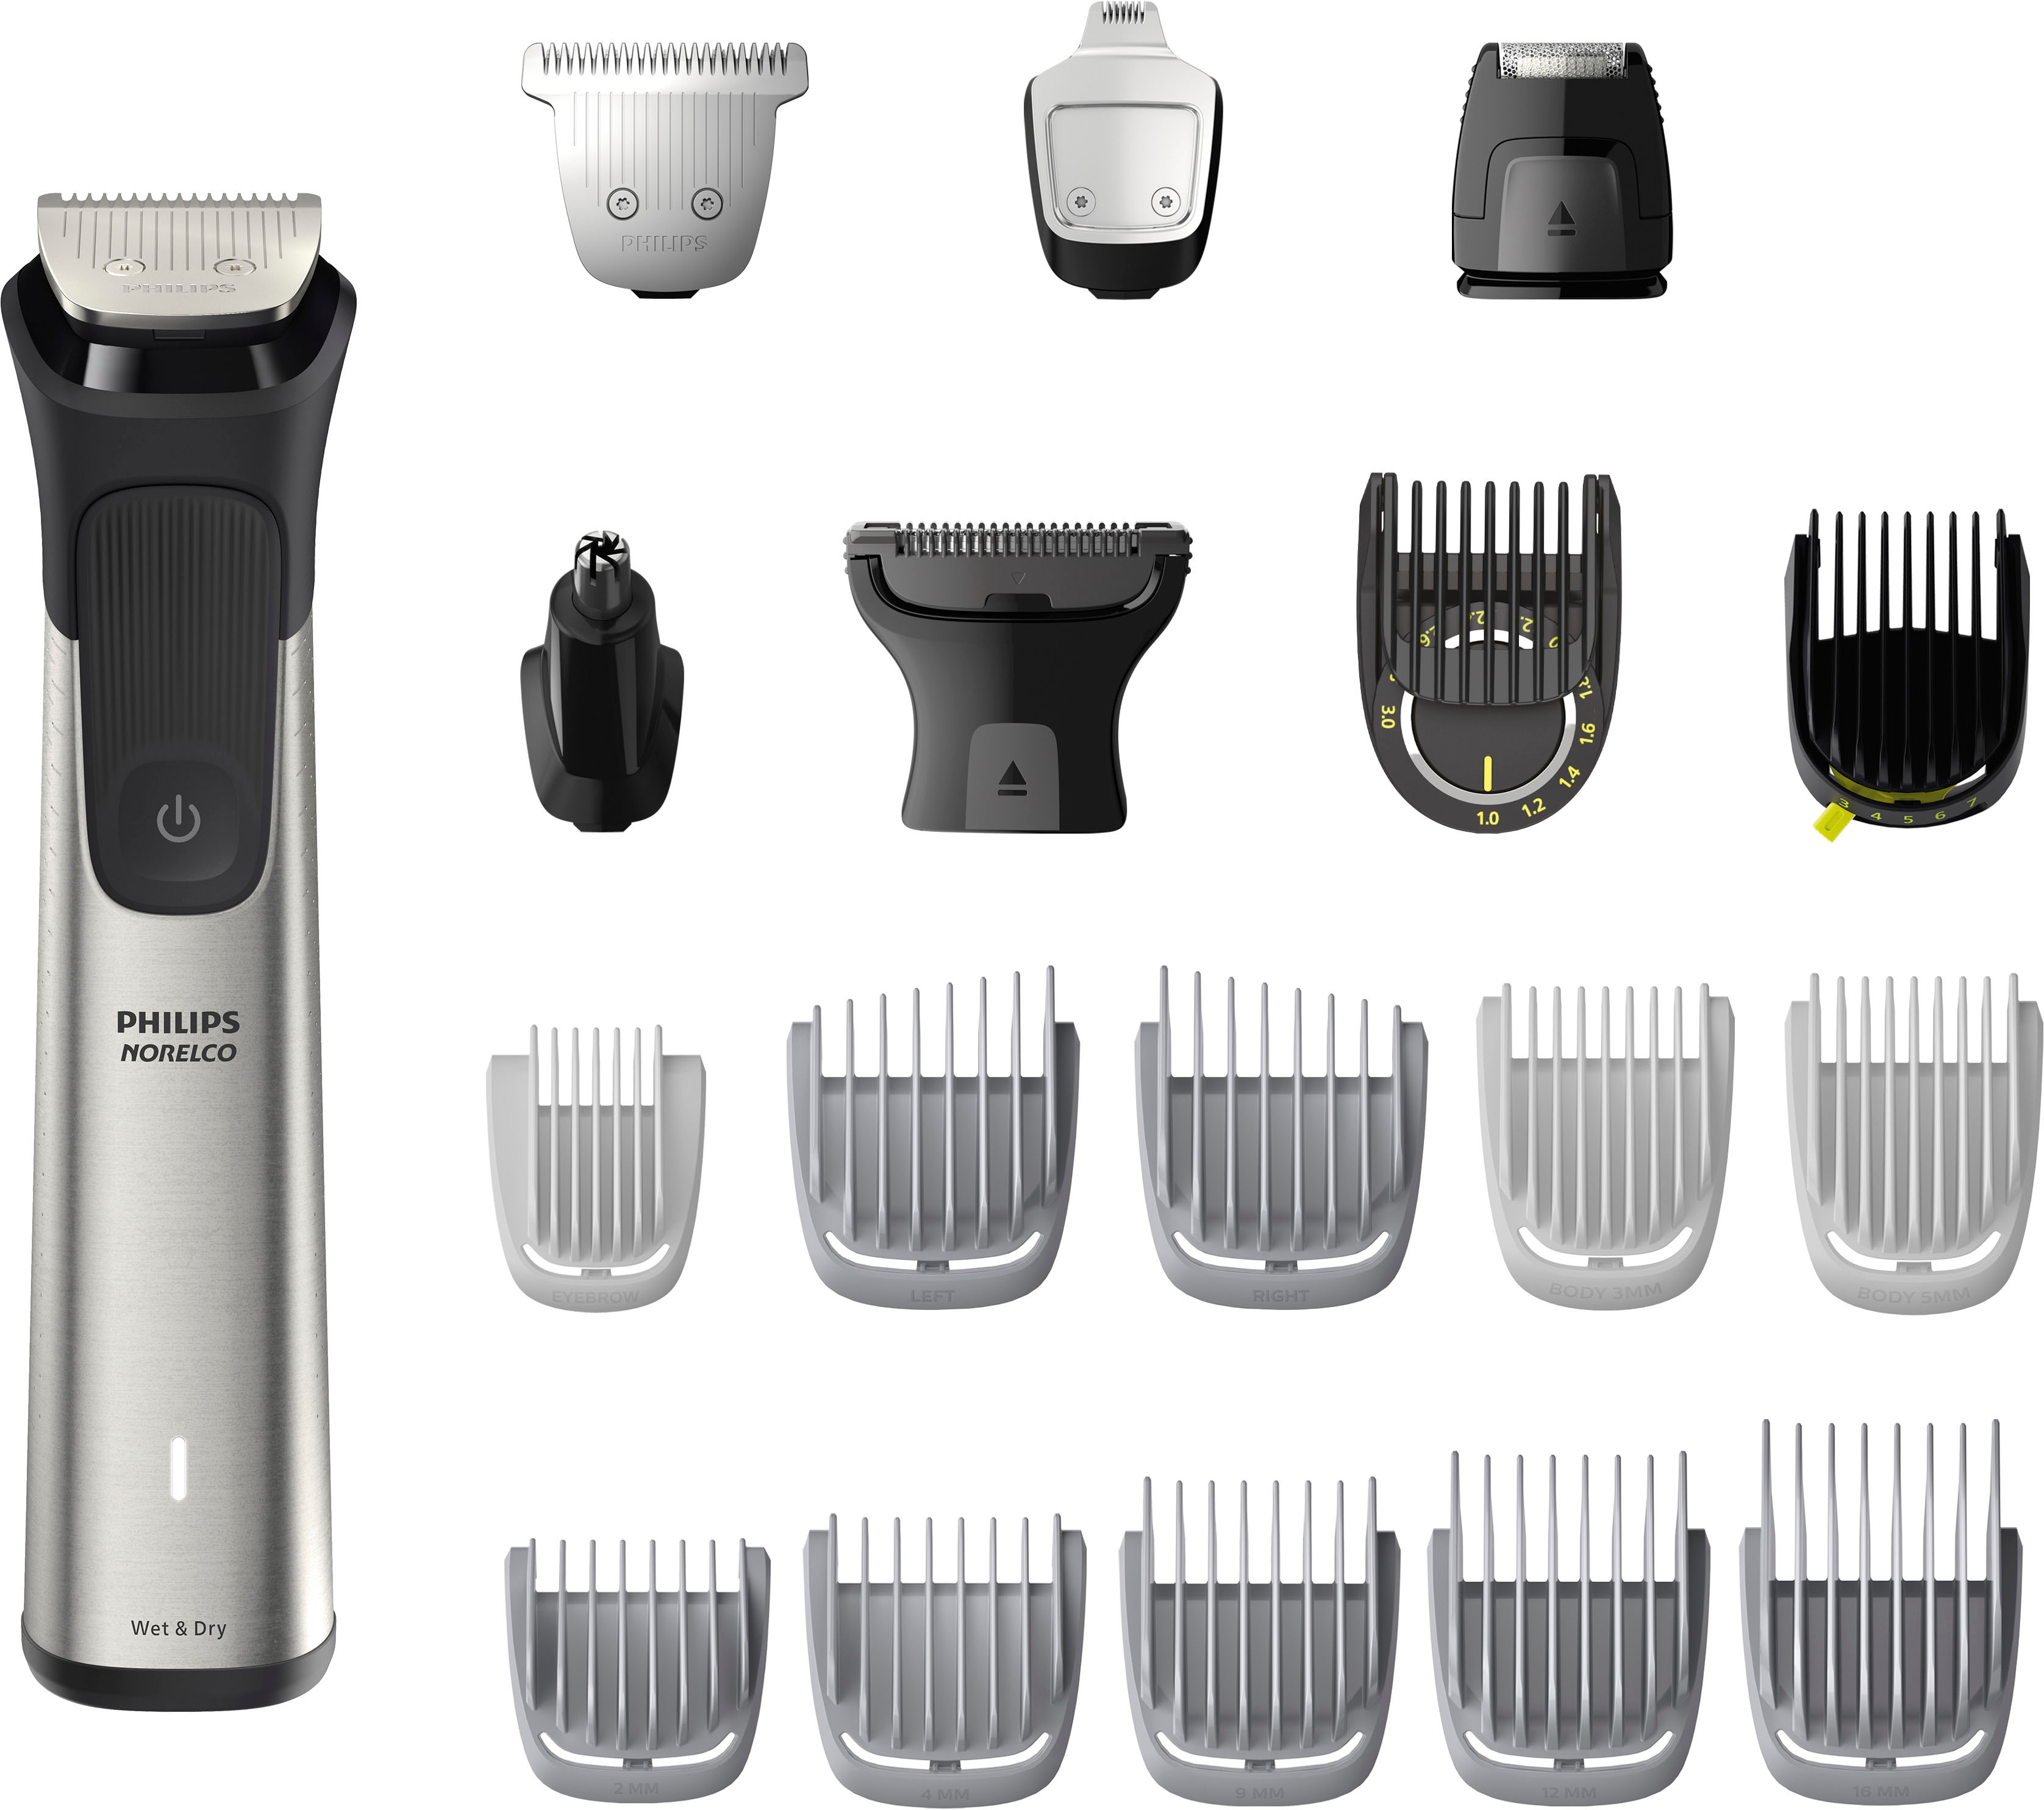 Angle View: Philips Norelco - Multigroom Series 9000 - 21 Piece Men's Grooming Kit - Silver